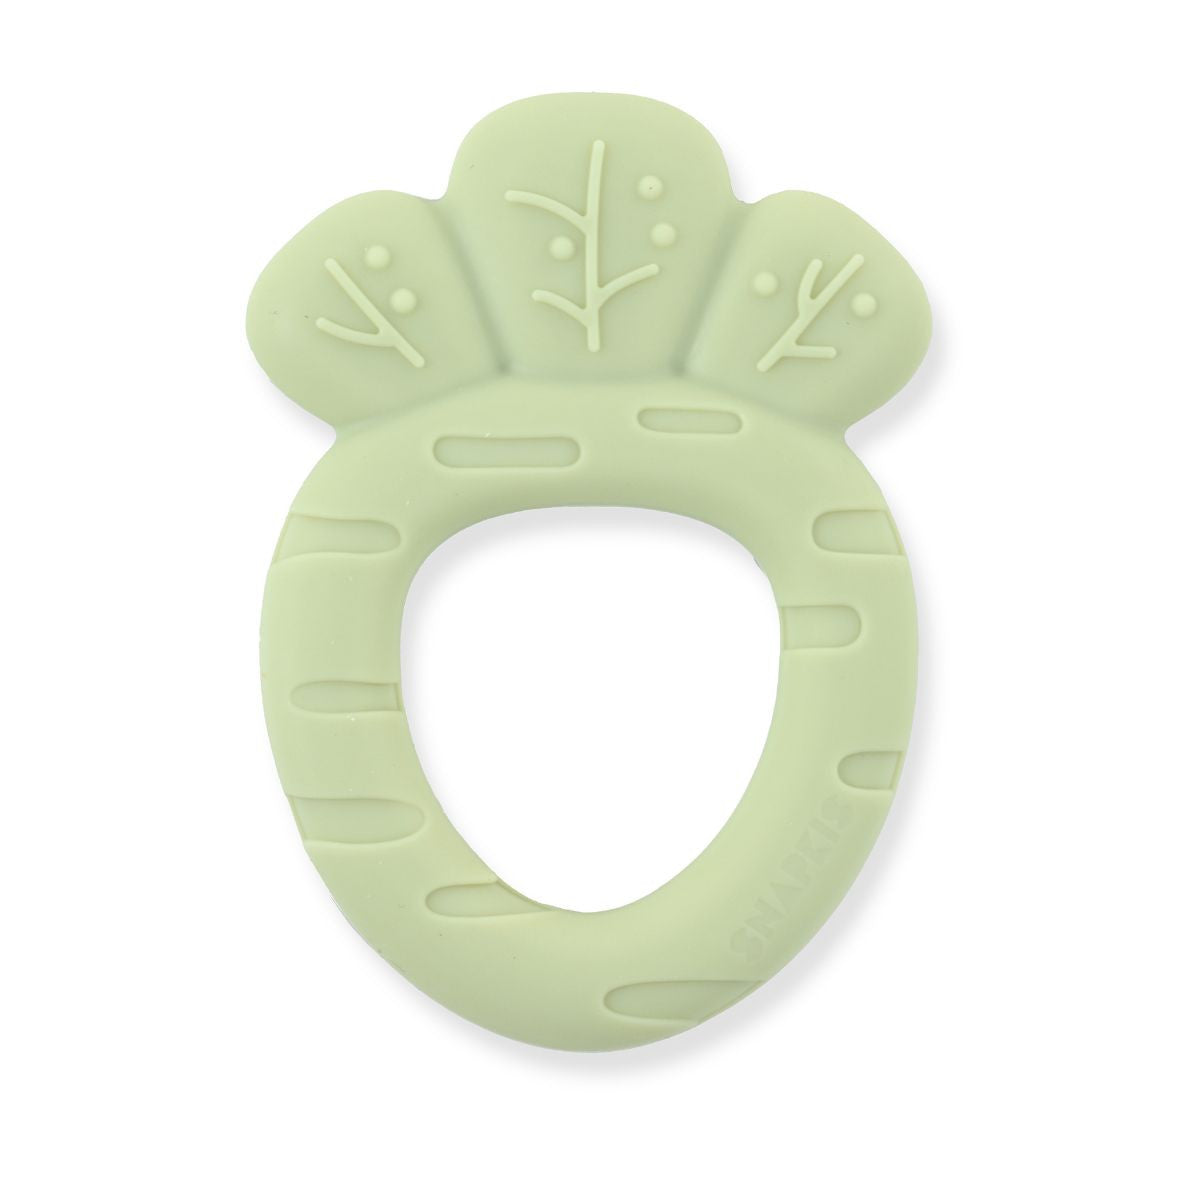 Snapkis Carrot Silicone Teether - Assorted Colours